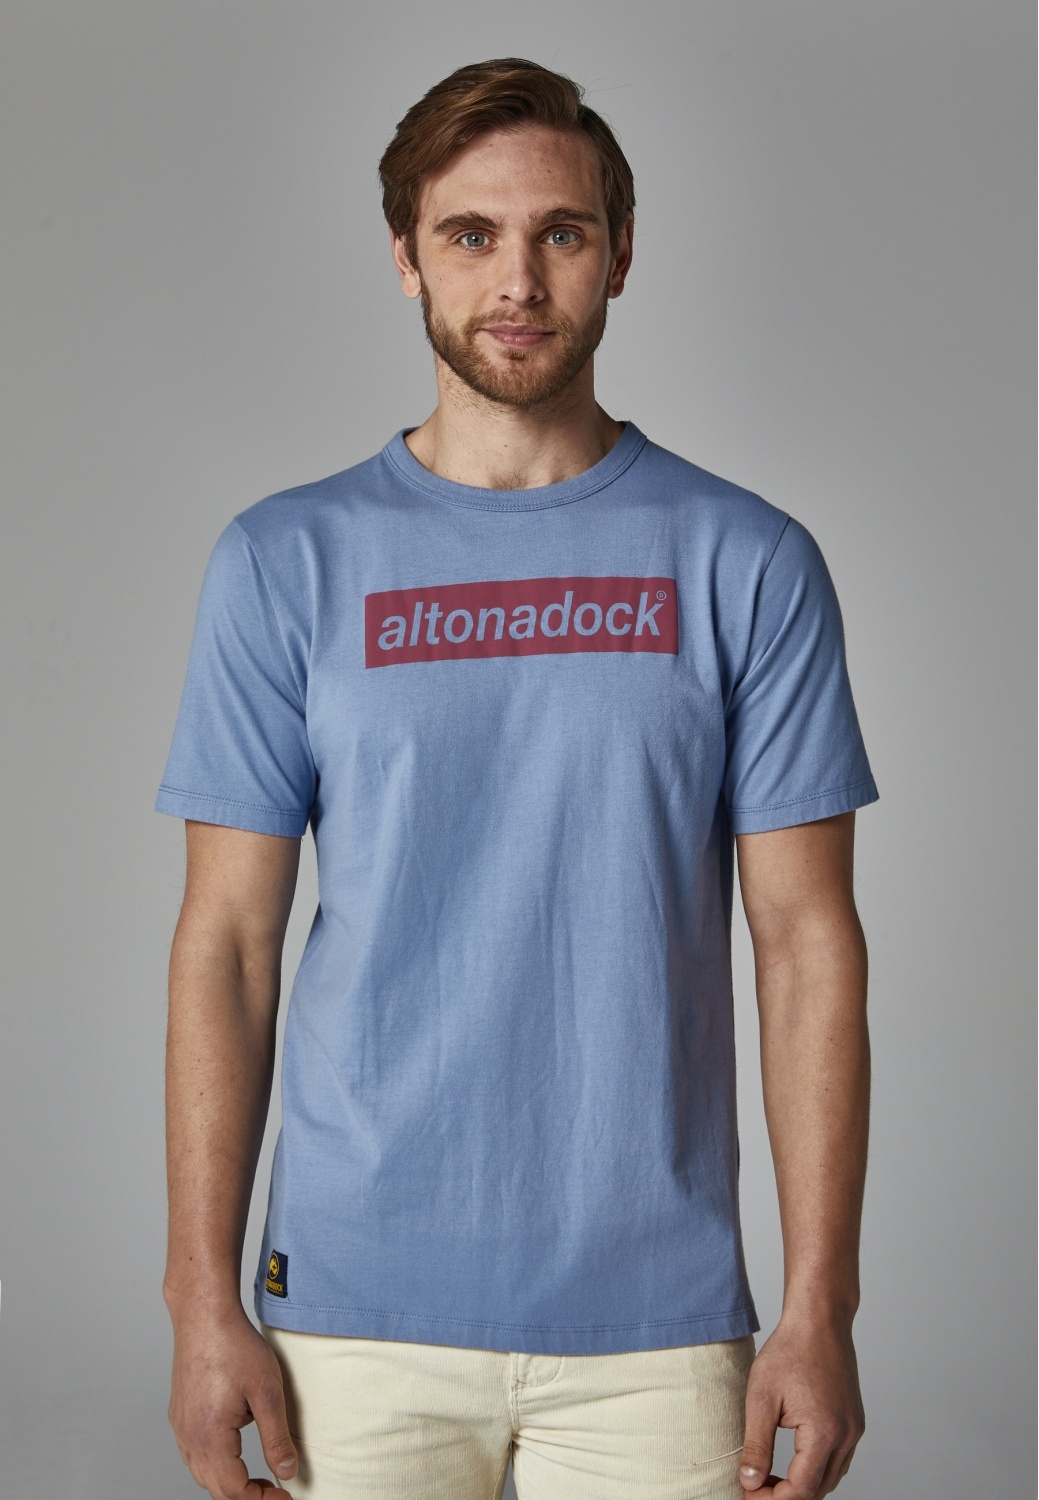 T-SHIRT IN BLUE TONE WITH...